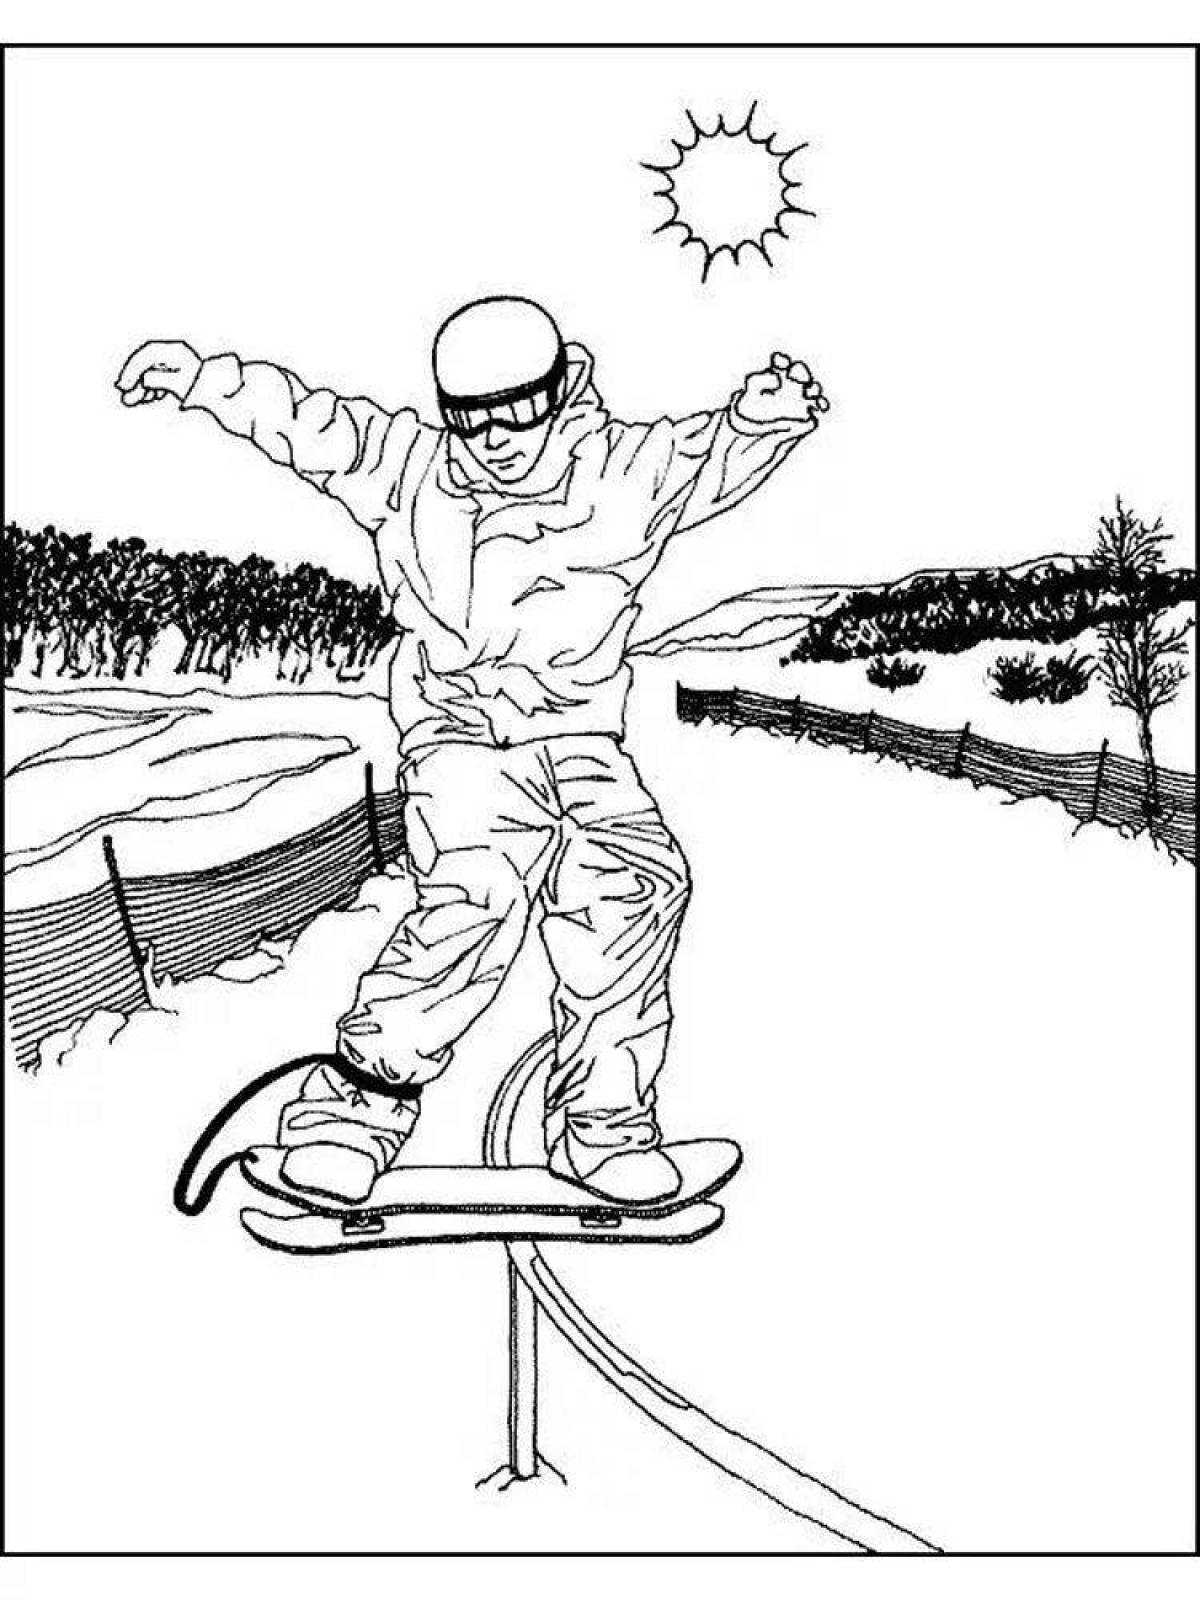 Coloring page joyful snowboarder